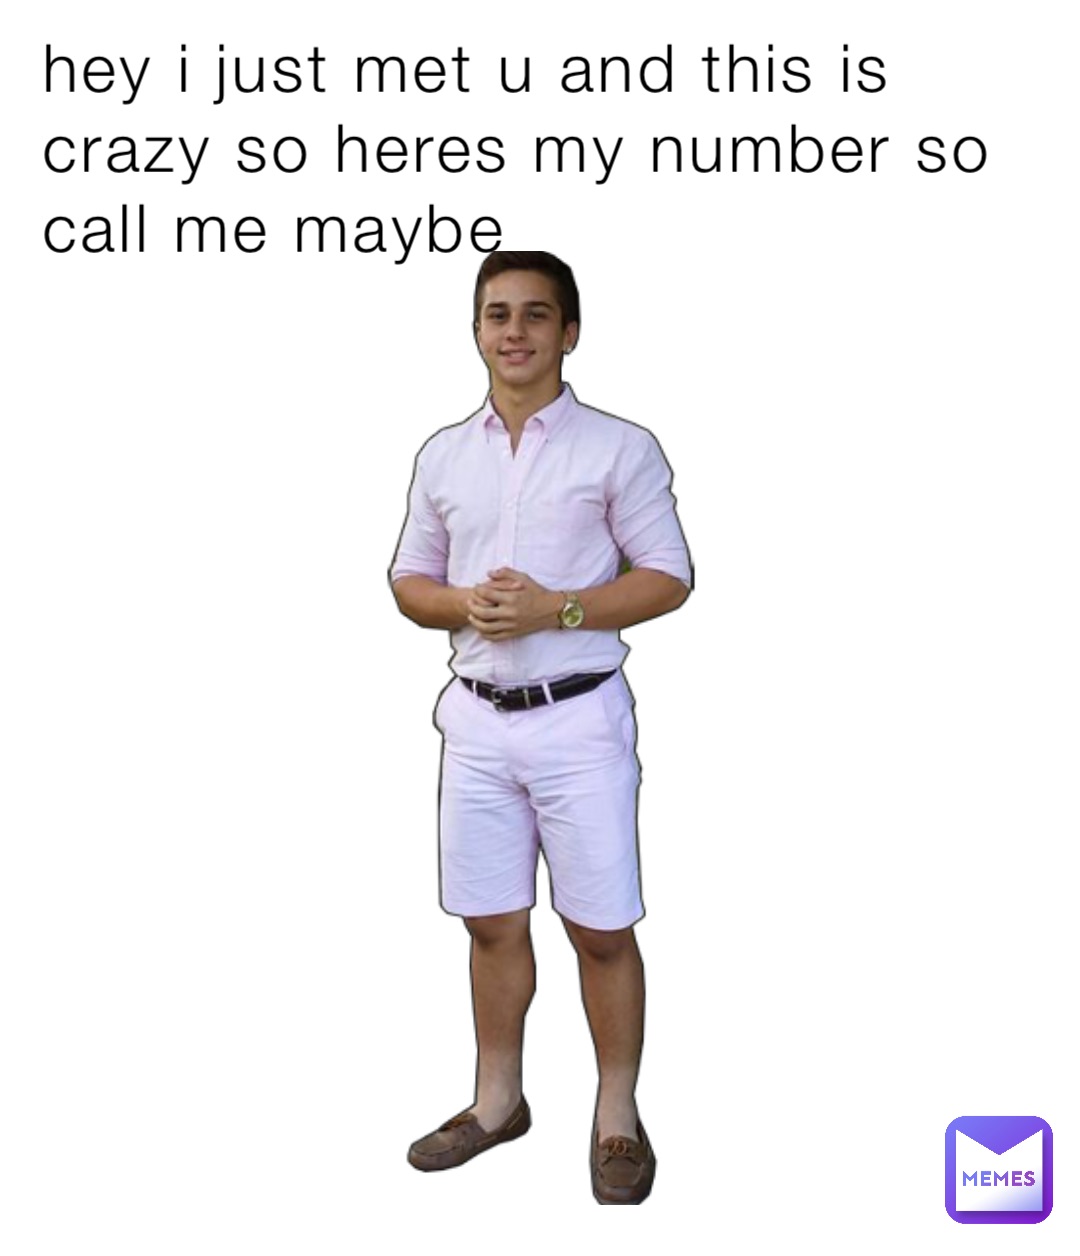 hey i just met u and this is crazy so heres my number so call me maybe